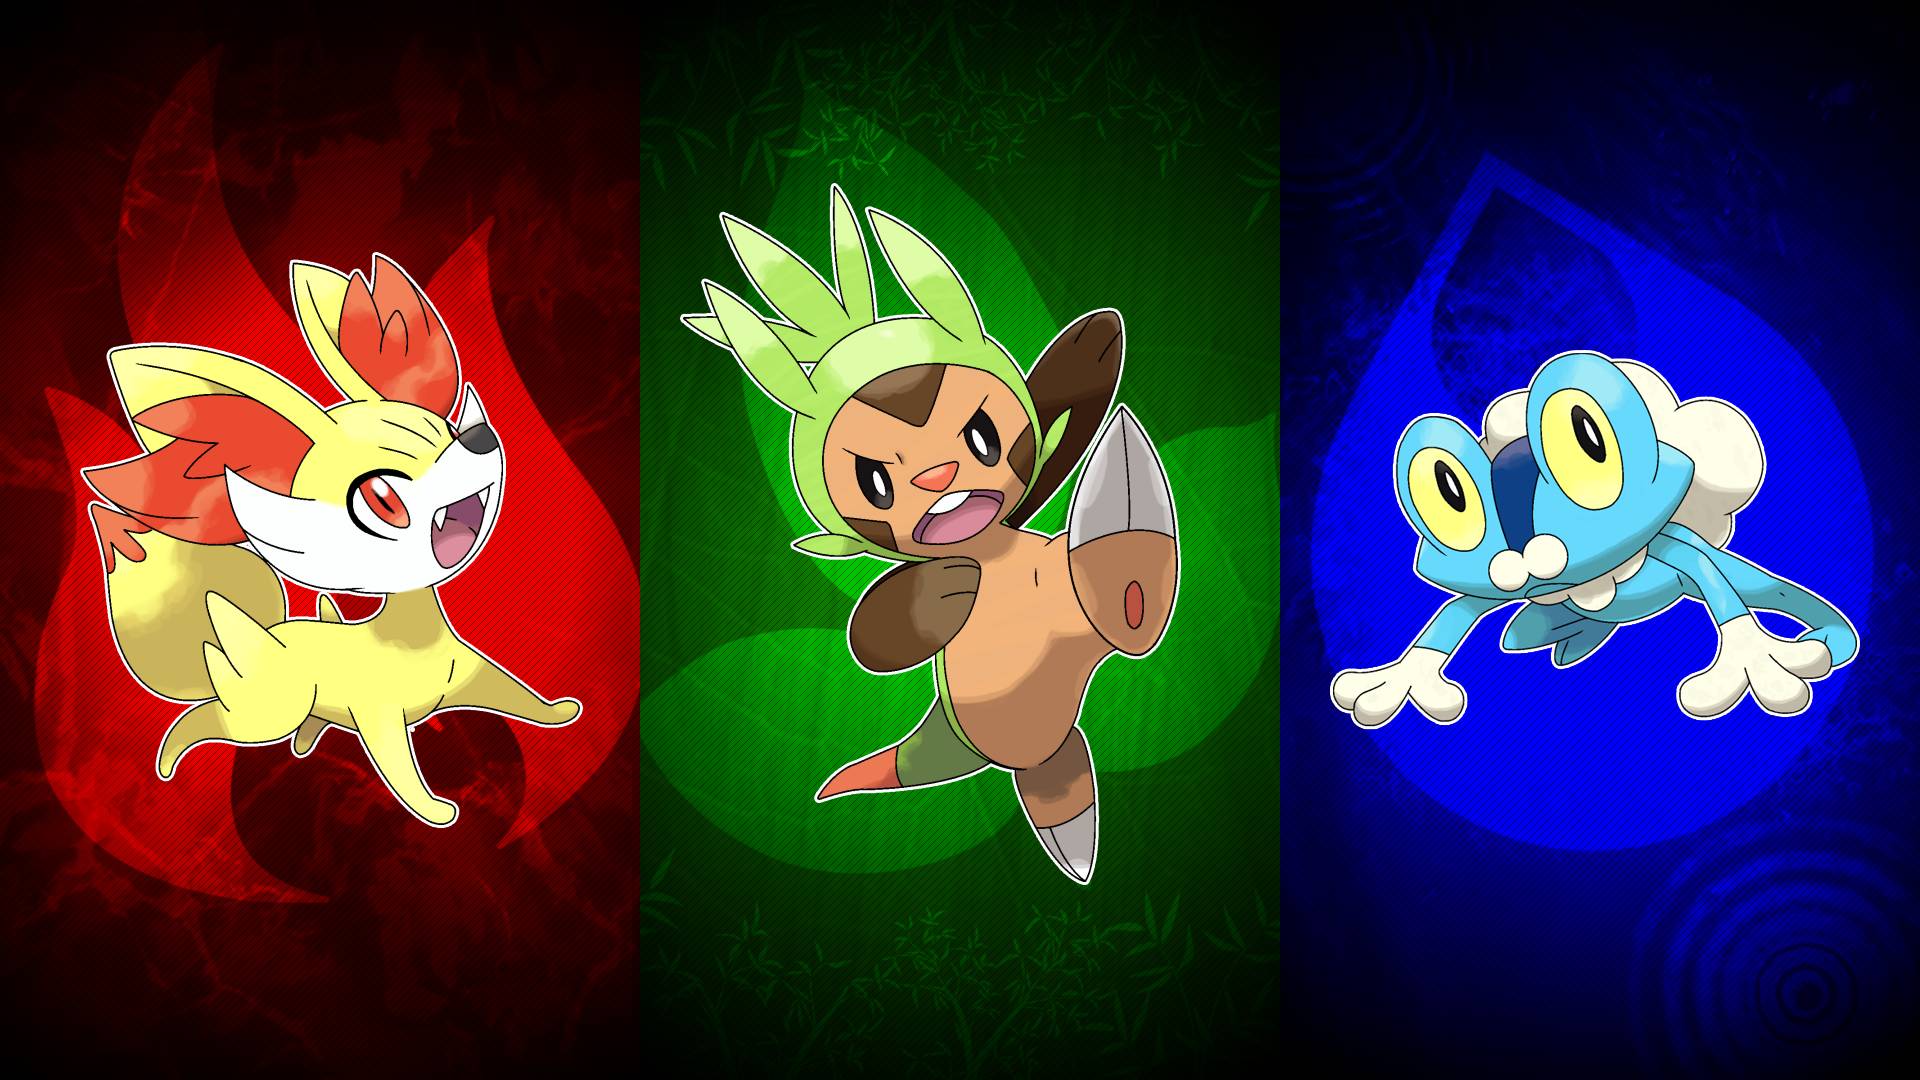 video game, pokemon: x and y, black eyes, chespin (pokémon), fennekin (pokémon), froakie (pokémon), pokémon, red eyes, yellow eyes